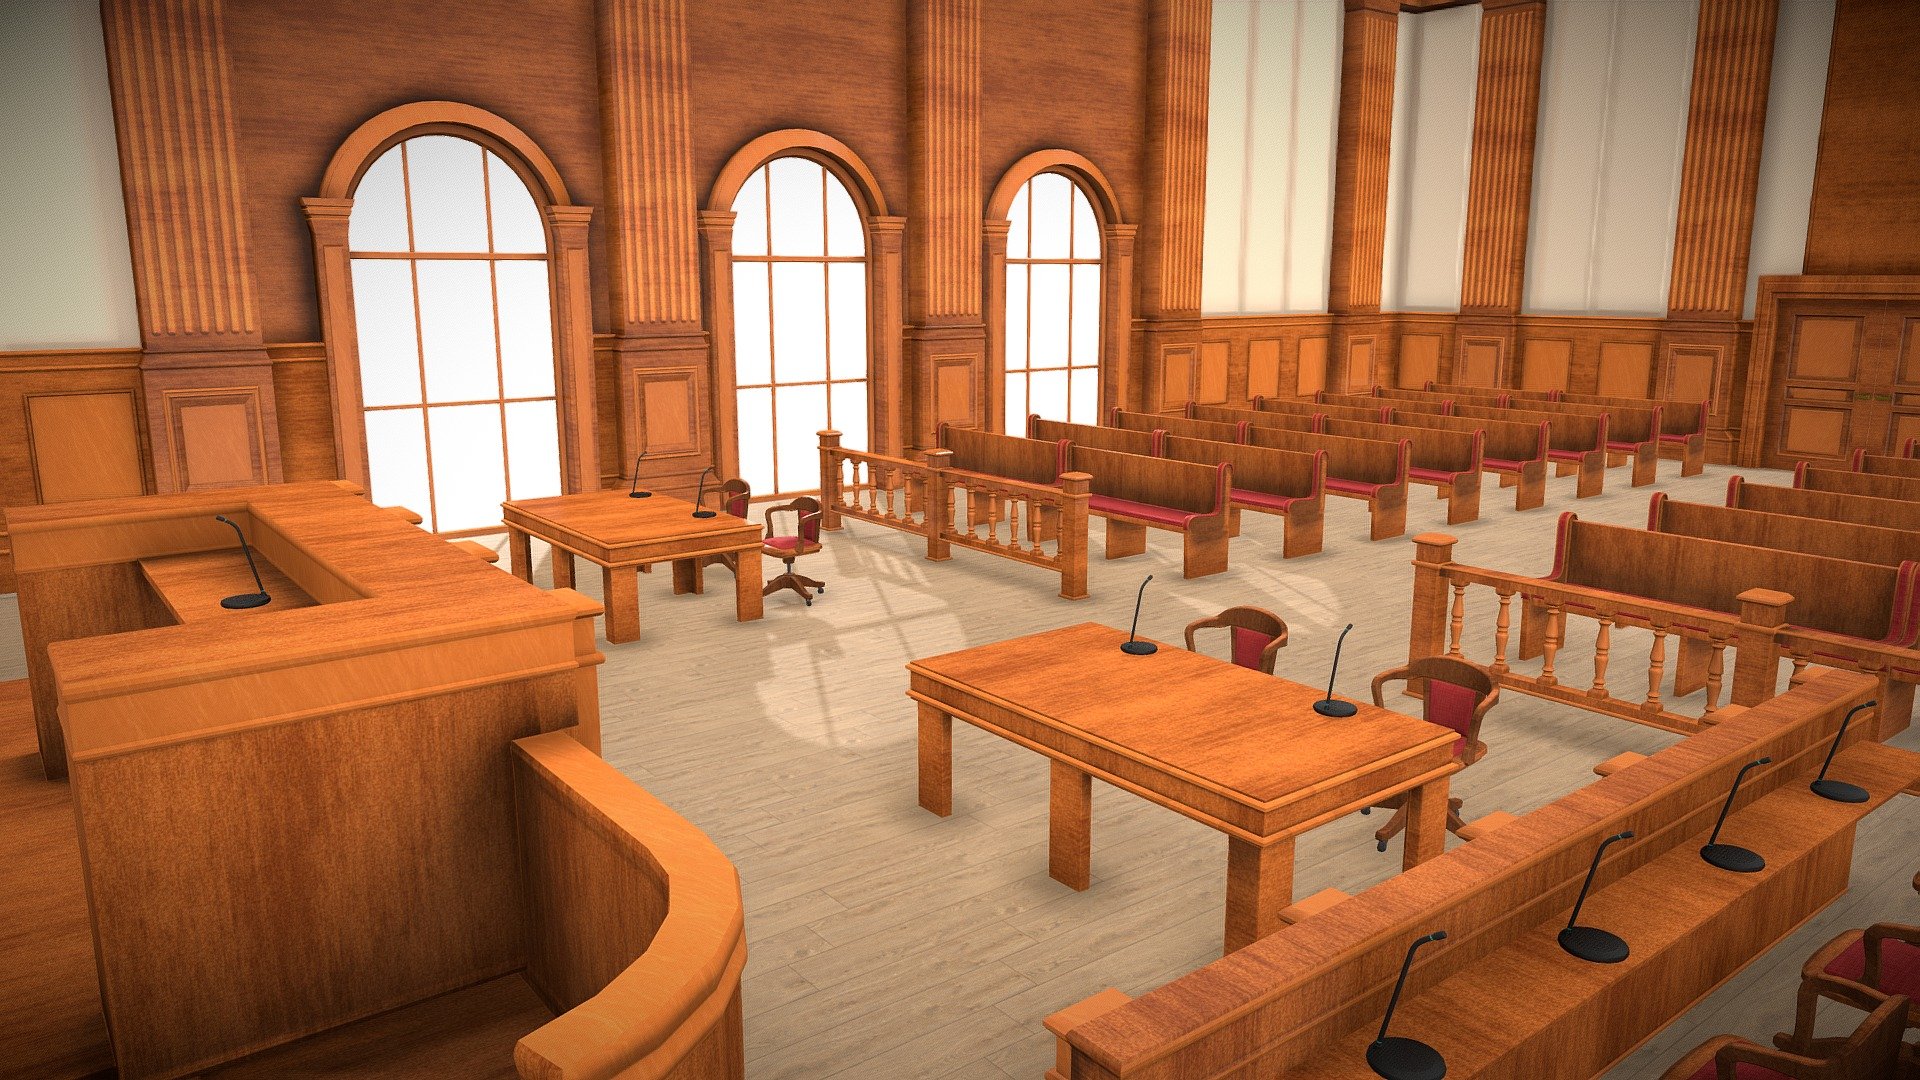 Low poly modular court room

1.High quality polygonal model, correctly scaled for an accurate representation of the original object.

2.Models resolutions are optimized for polygon efficiency.

3.All colors can be easily modified.

4.Model is fully UV textured with all materials applied.

5.Texture pack consists of AO, BaseColor, Diffuse, Metallic, Normal, Roughness, Height

Included PBR textures with resolutions 4096x84096px 3d model